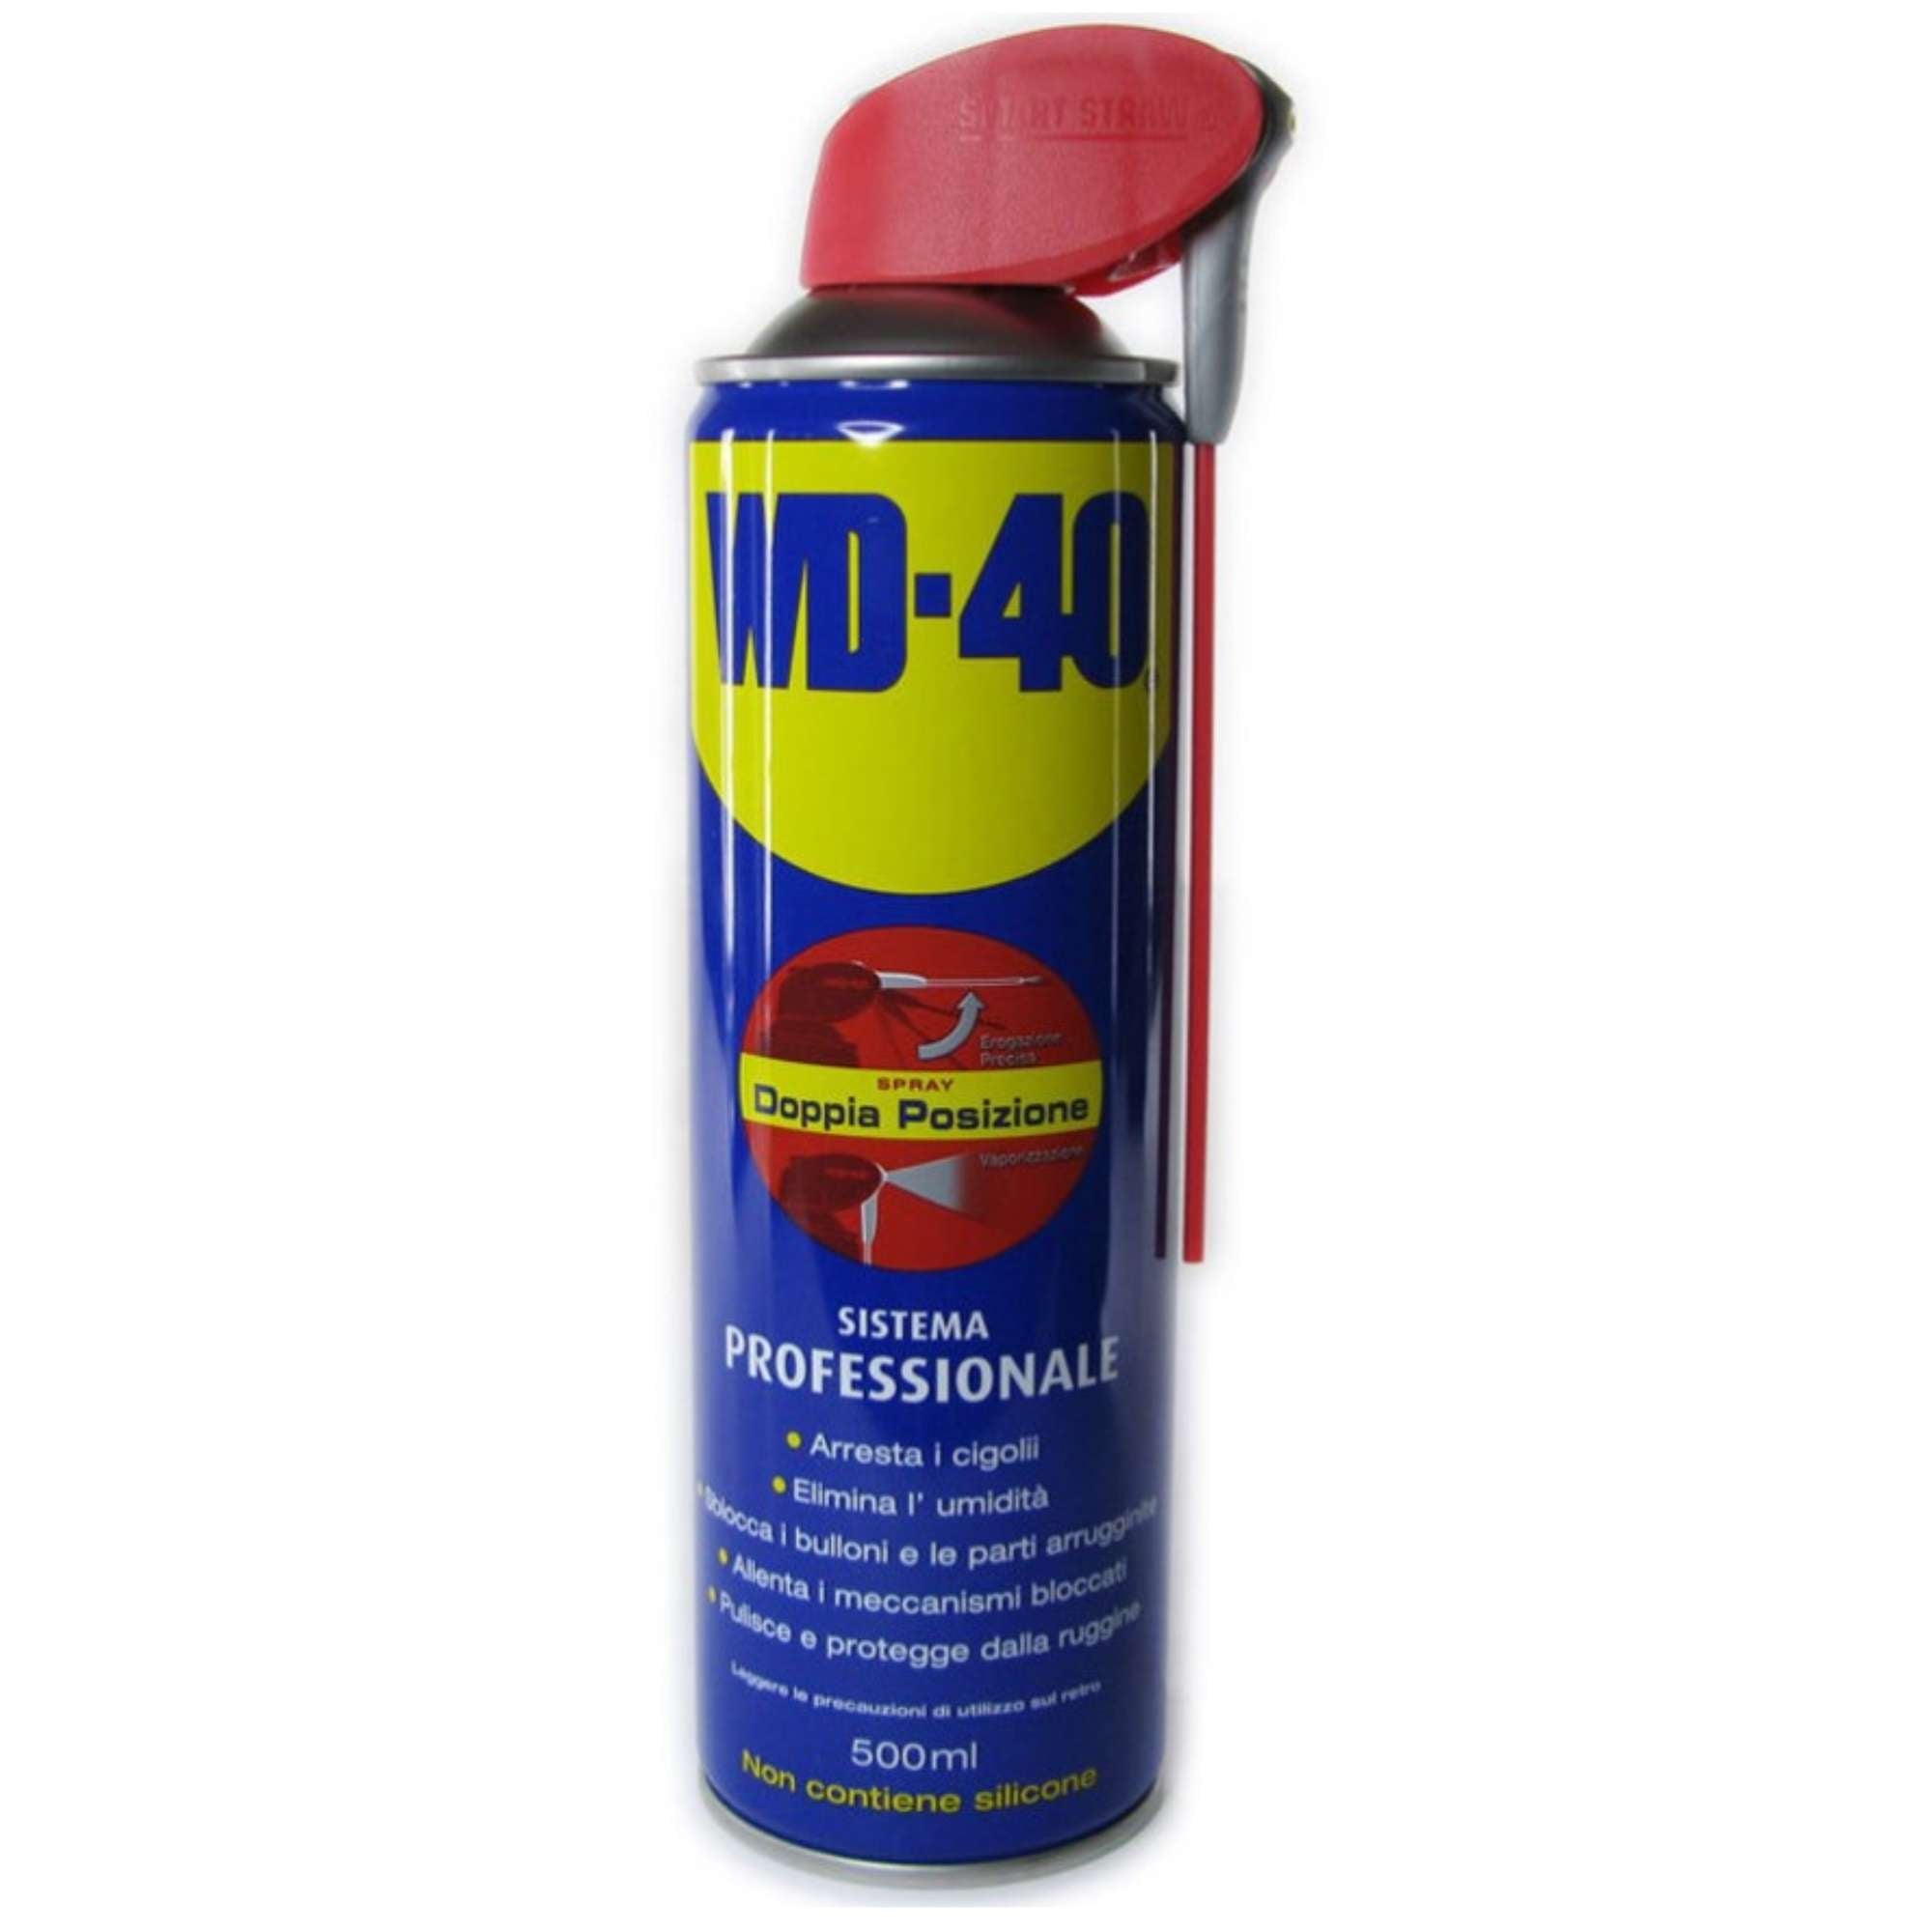 Multifunctional product, unlocking, lubricant - WD-40